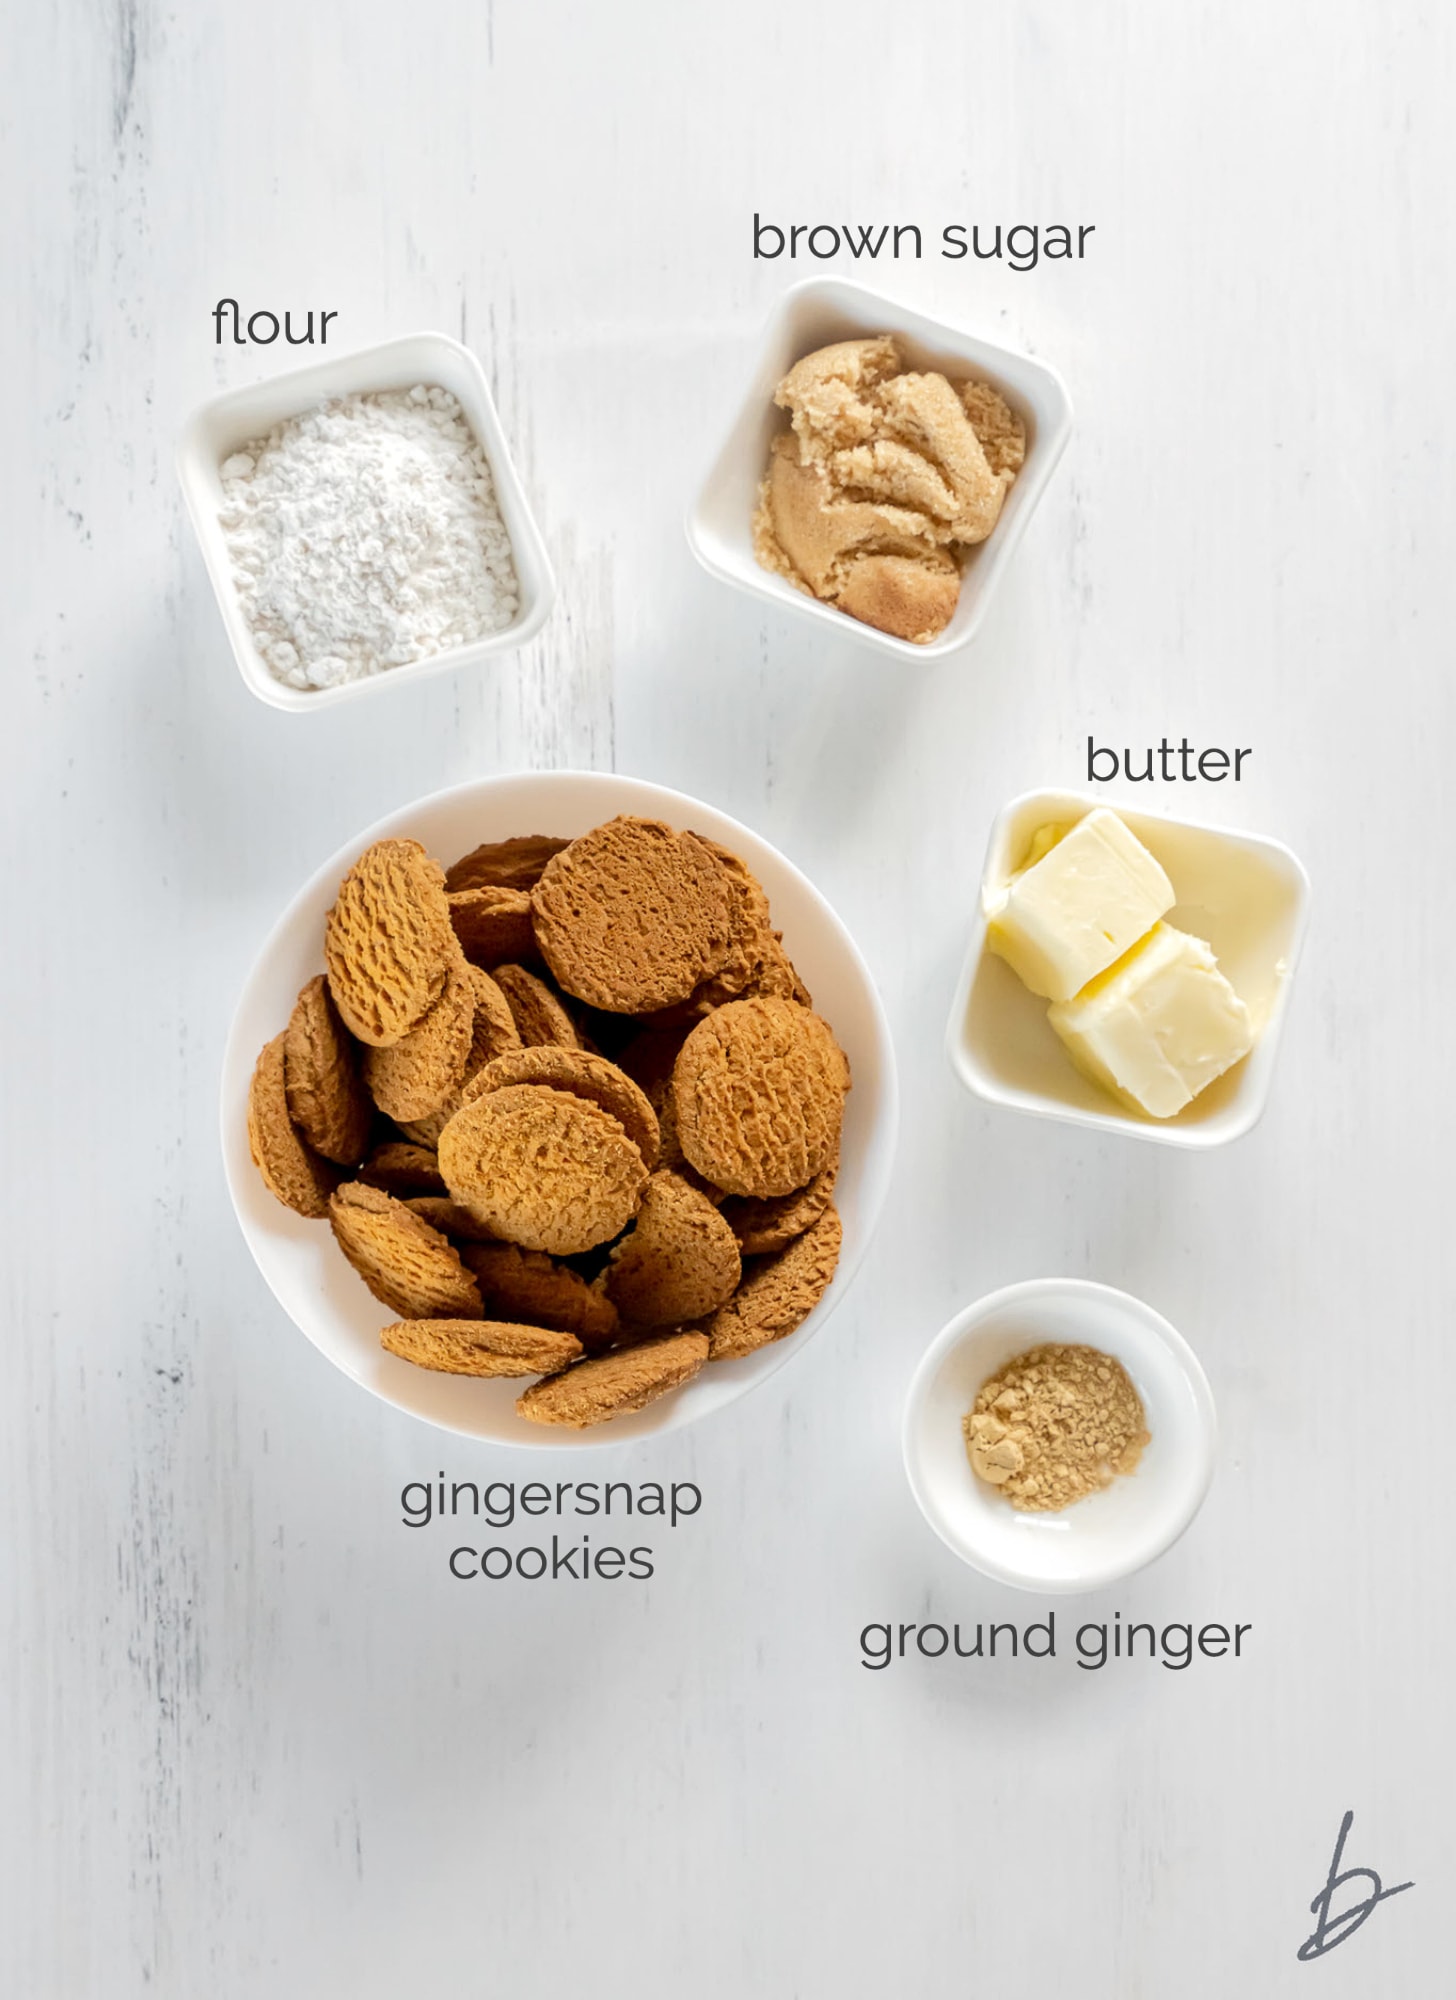 Gingersnap crust ingredients in bowls labeled with text.